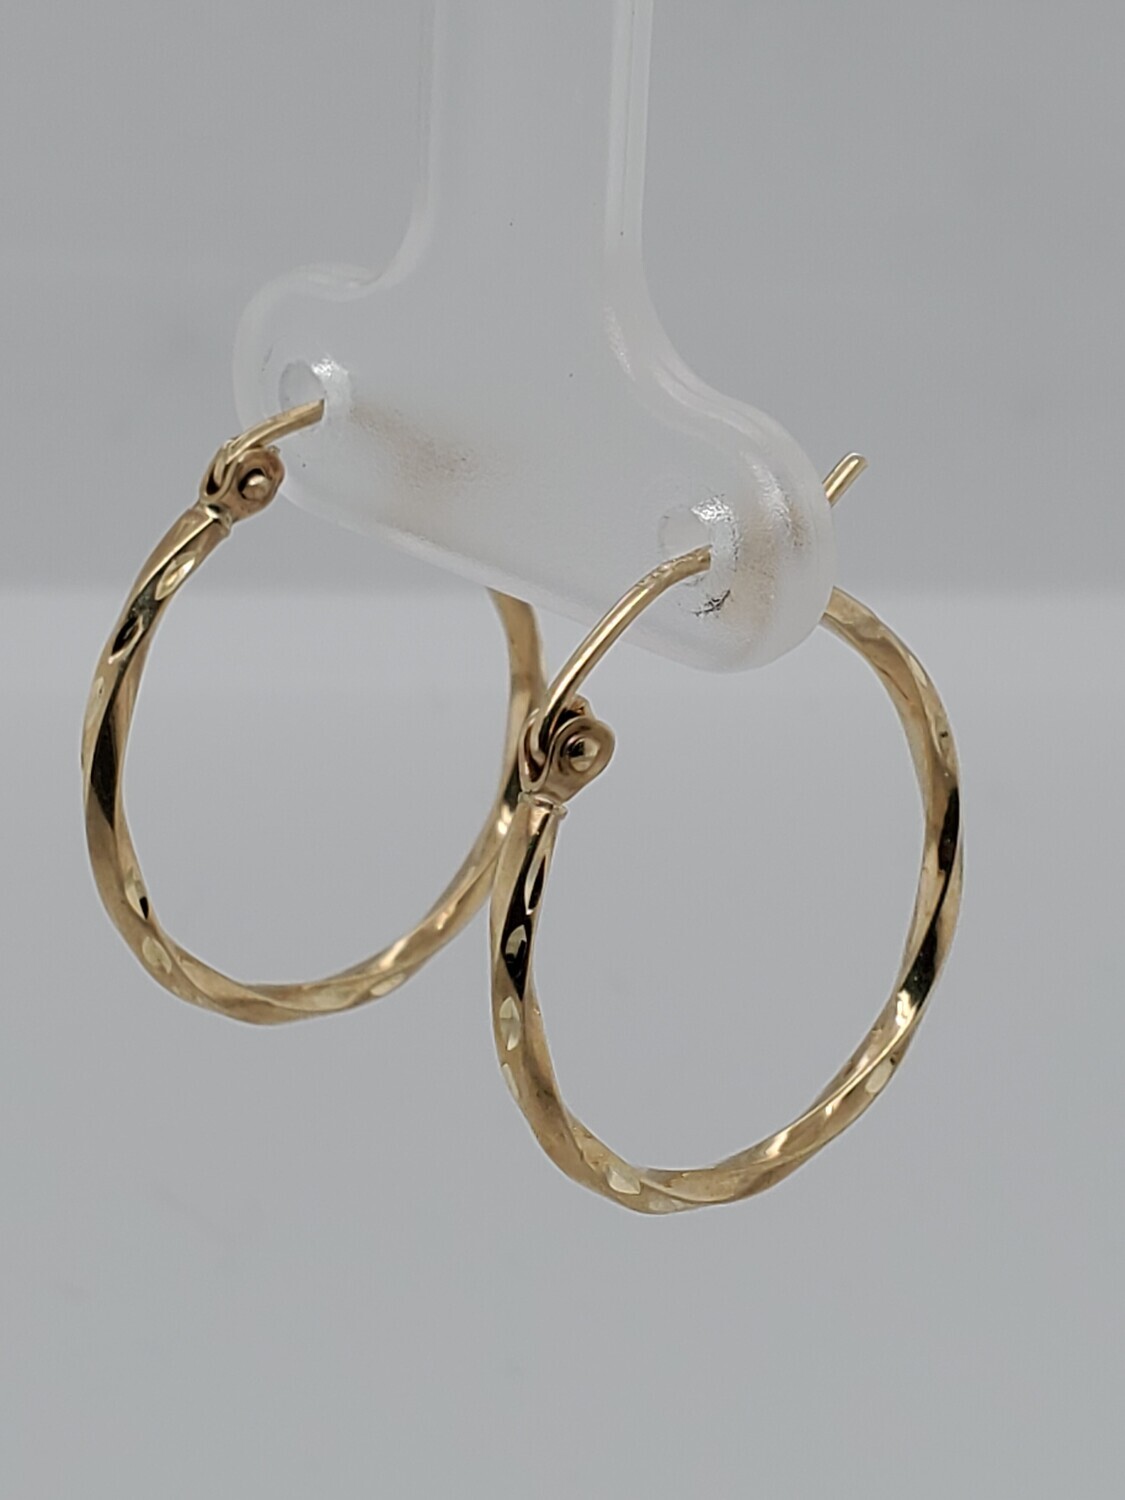 BRAND NEW!! 10KT SMALL TWISTED HOOP EARRINGS  INVENTORY # I-18340 75TH AVE